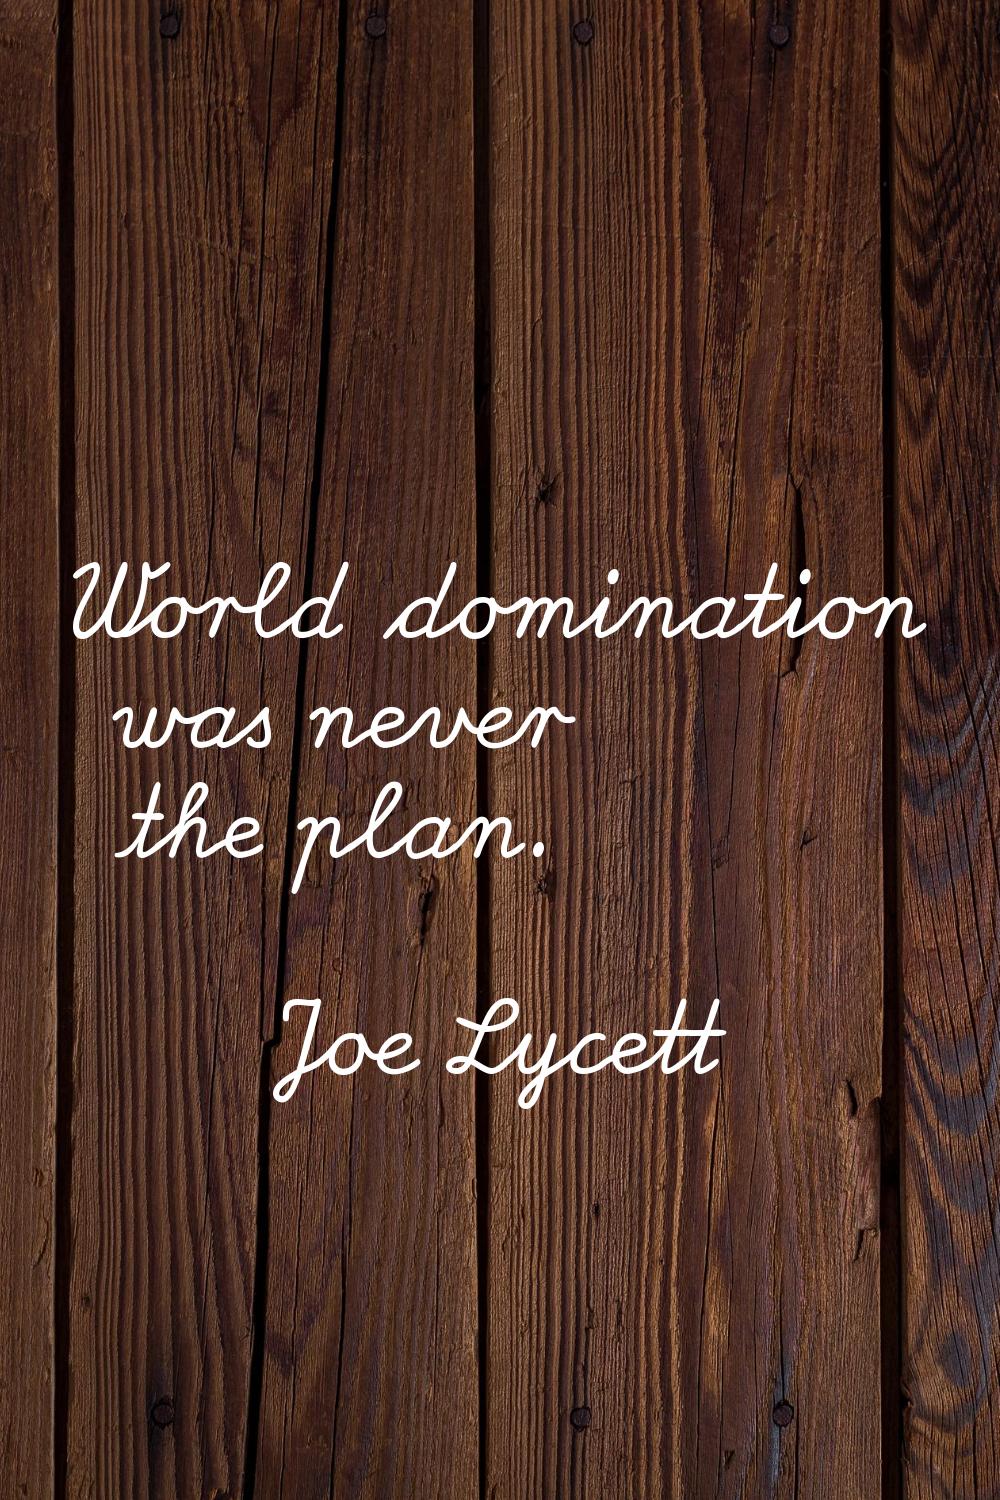 World domination was never the plan.